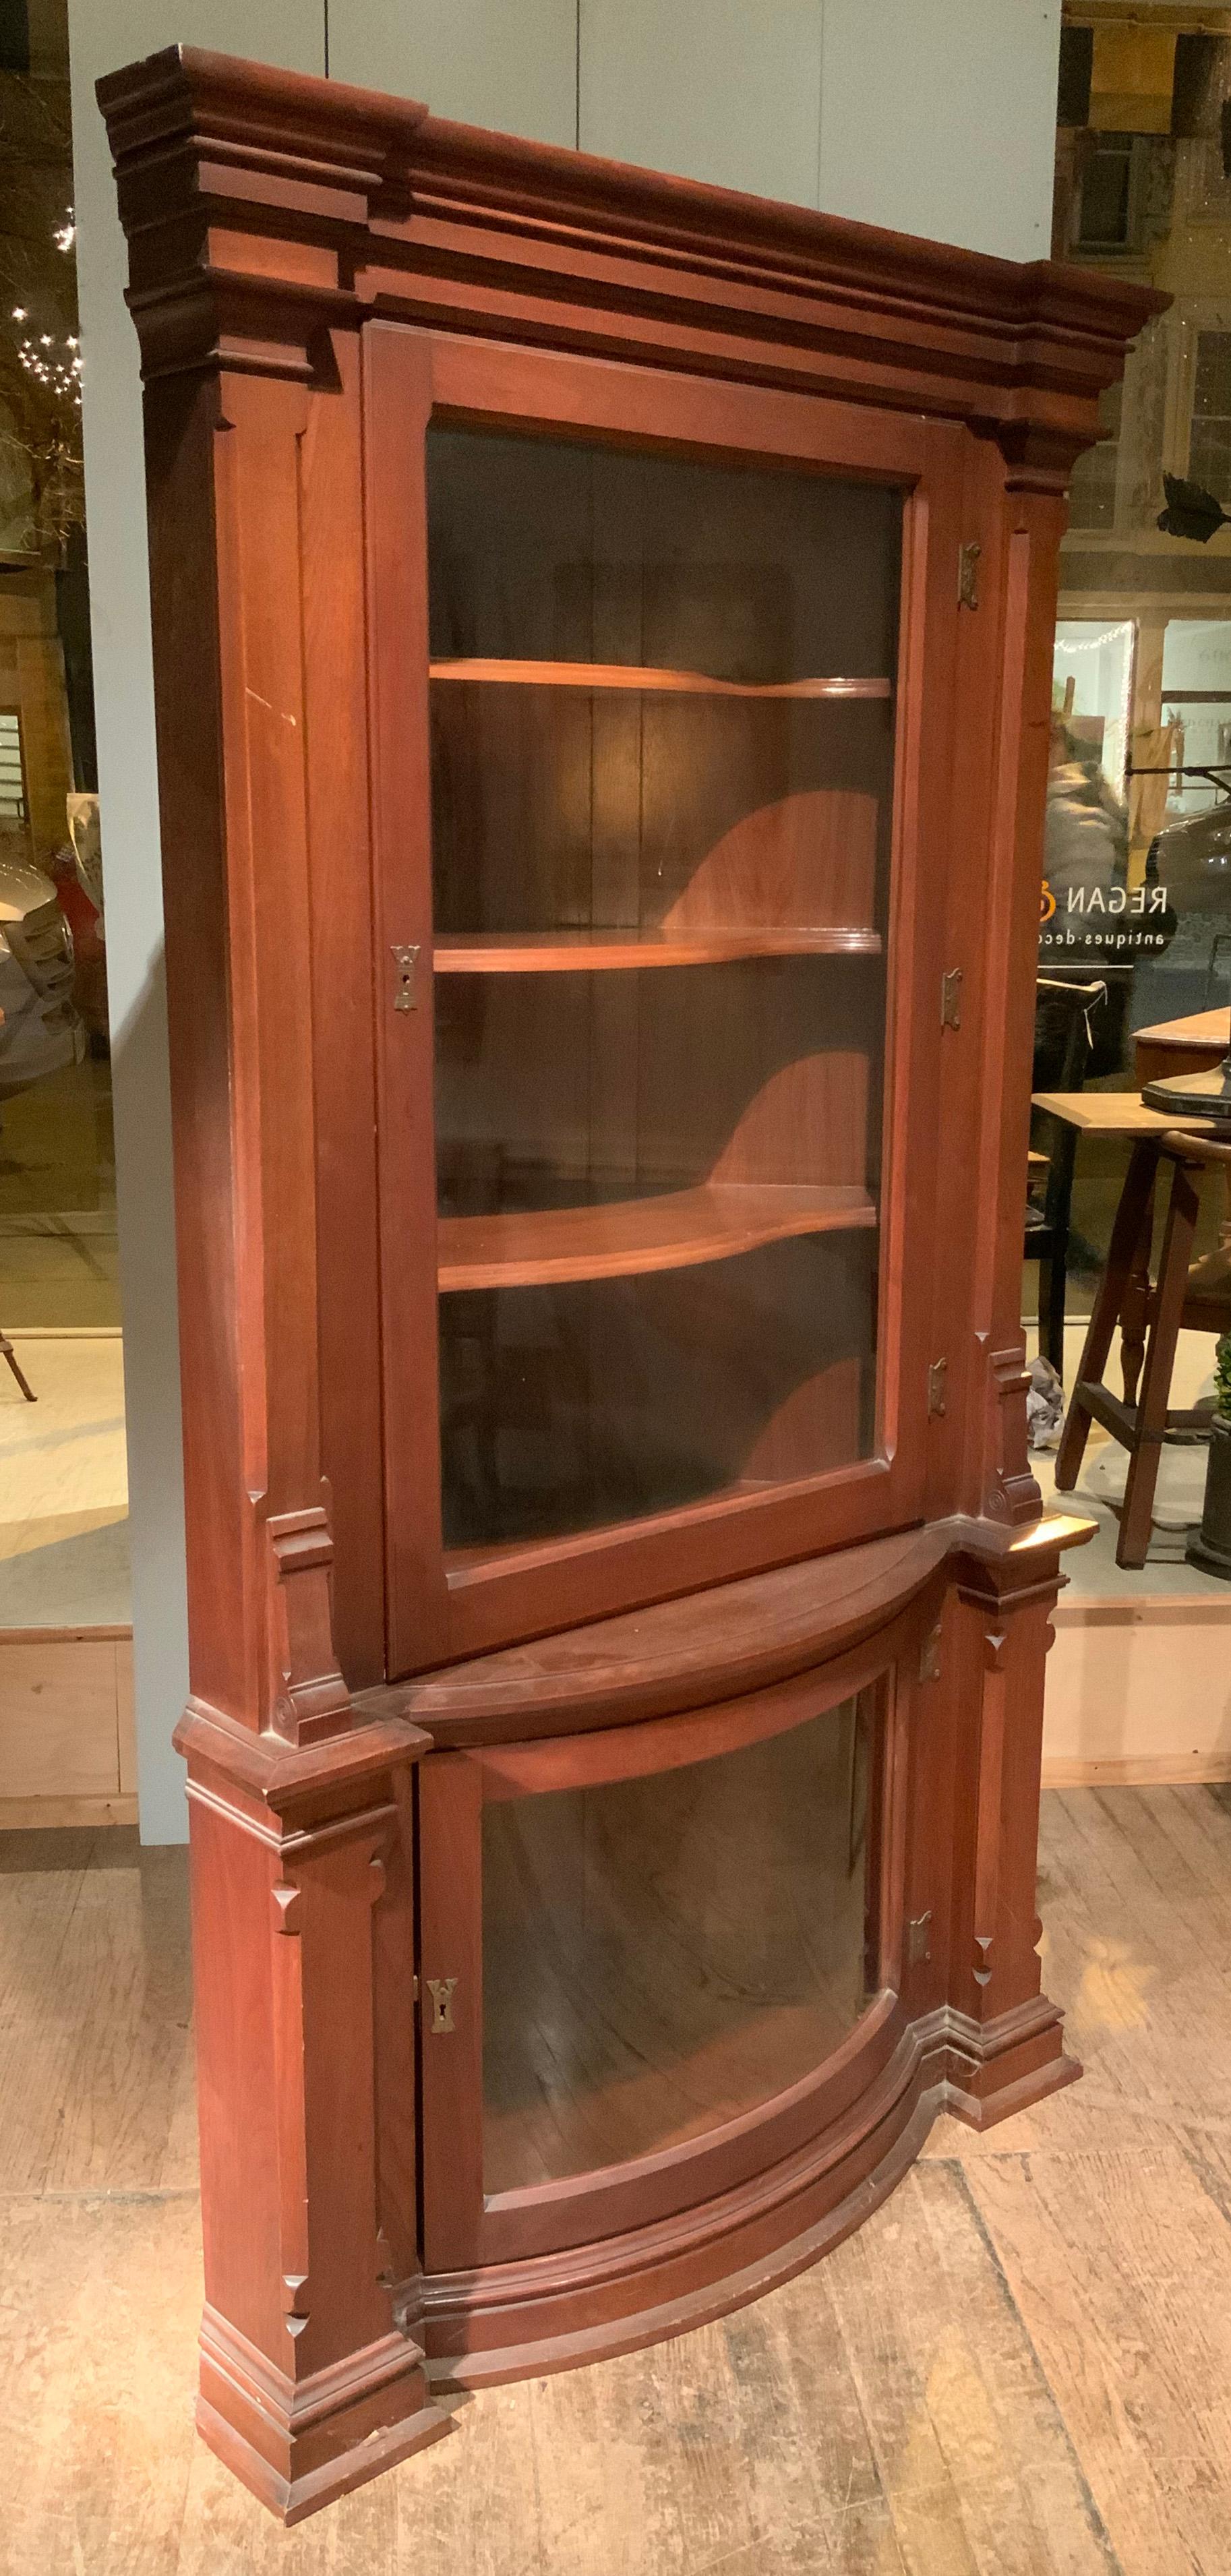 a very nice and beautifully detailed late 19th Century corner Cabinet, with a lower case with curved glass door. the cabinet has sculpted shelves in the upper portion, and stepped capitals. from an upper hudson valley home.